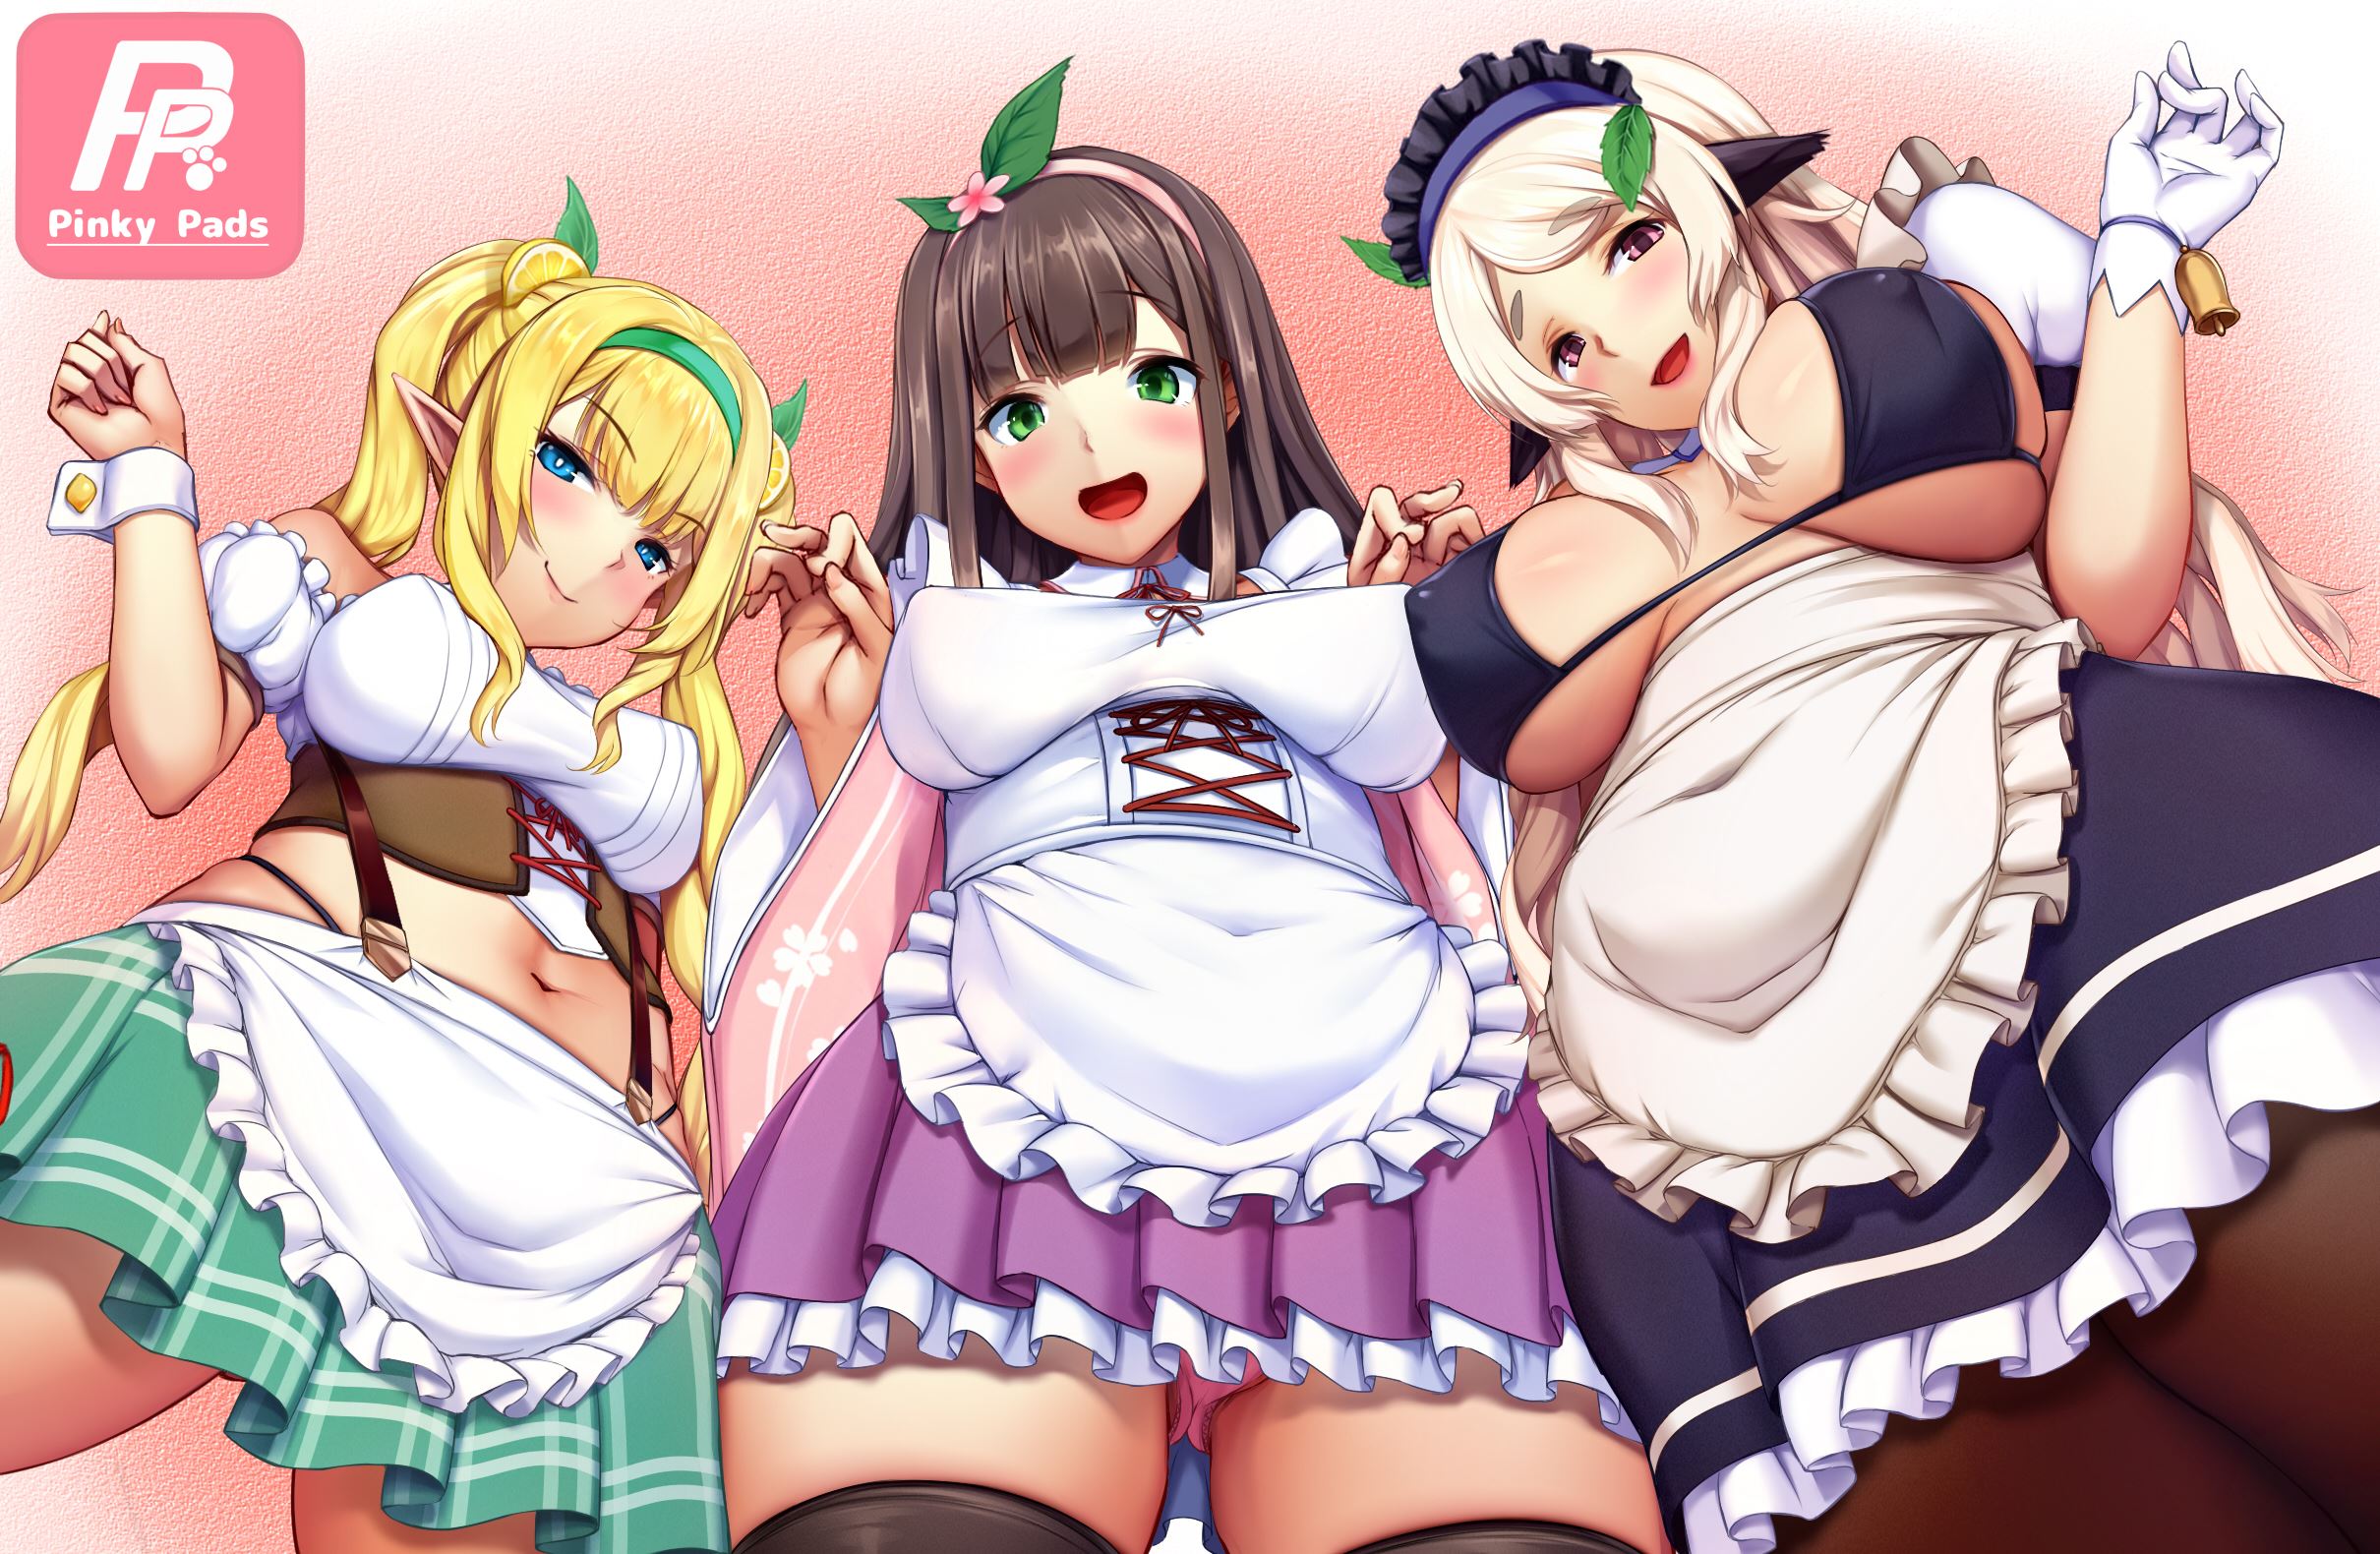 Tea Girls porn xxx game download cover